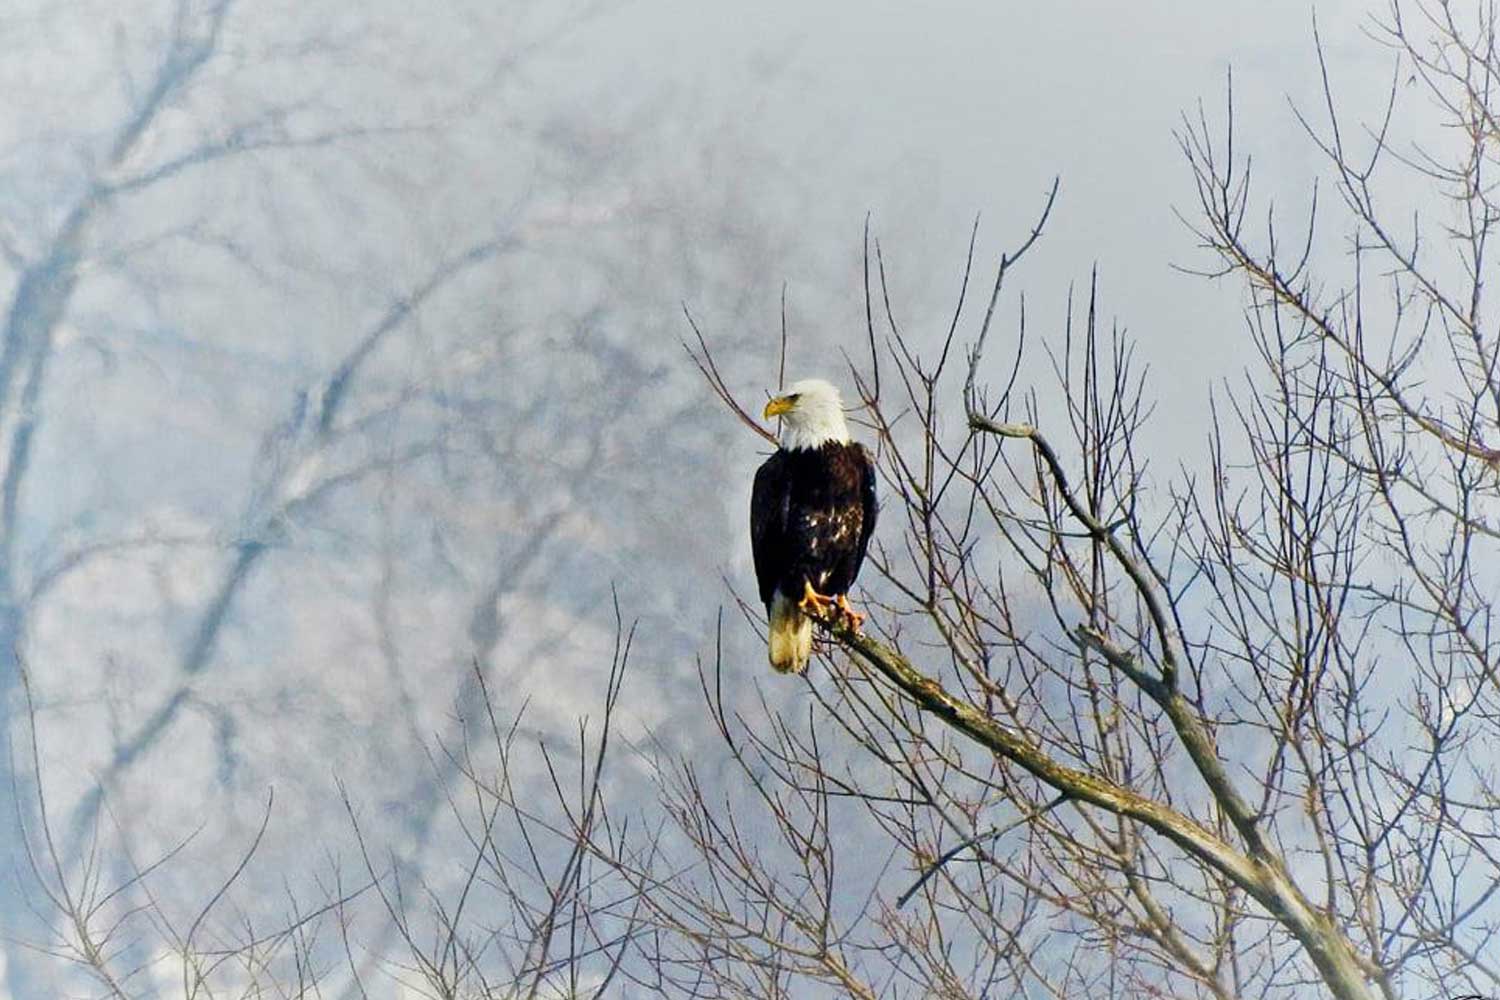 A bald eagle perched at the end of the branch surrounded by bare trees.